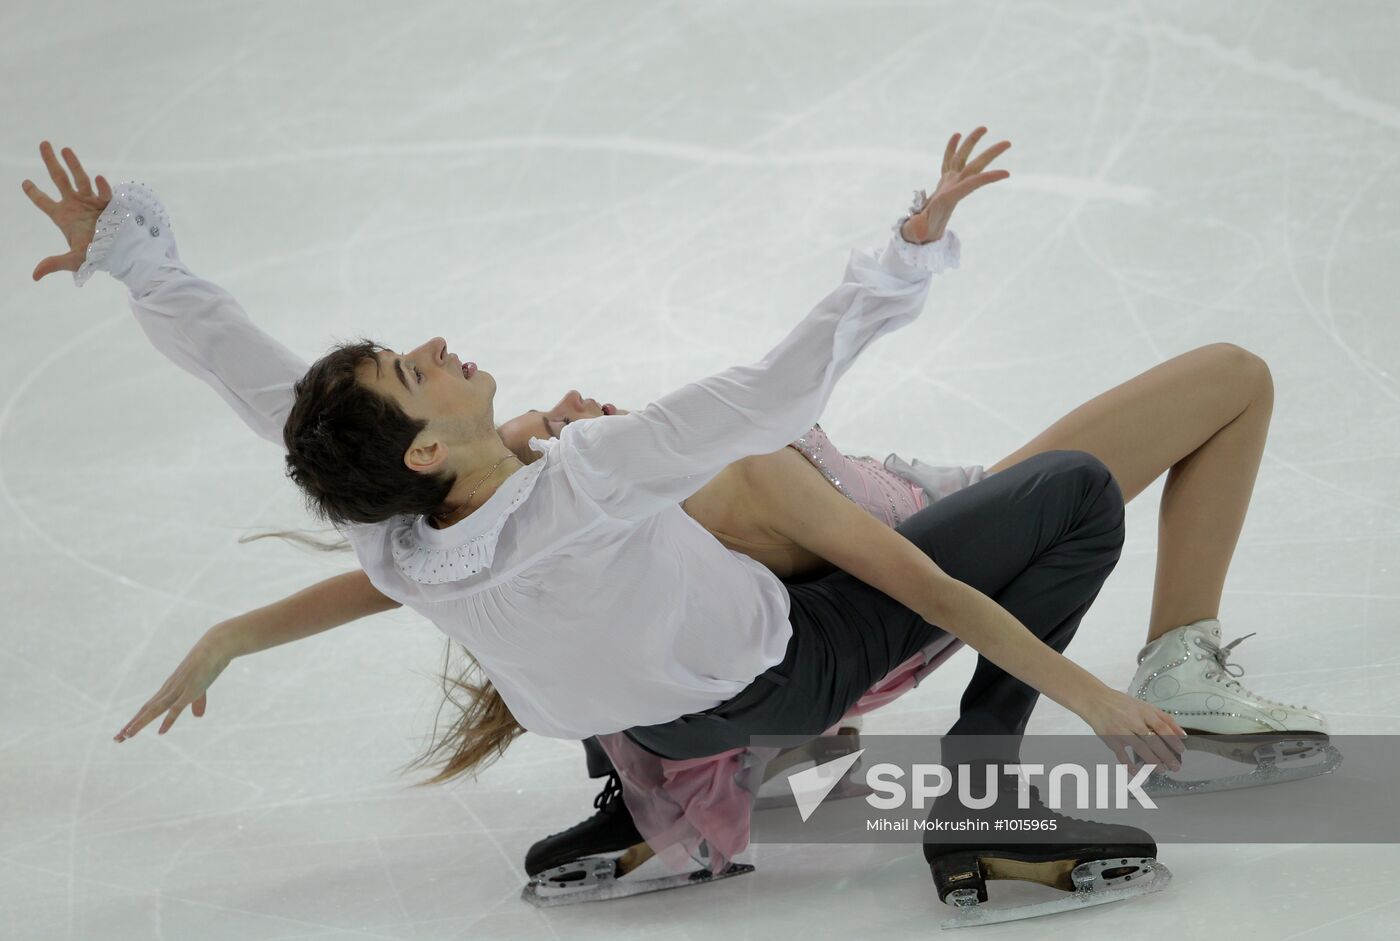 2012 Winter Youth Olympics: Figure Skating